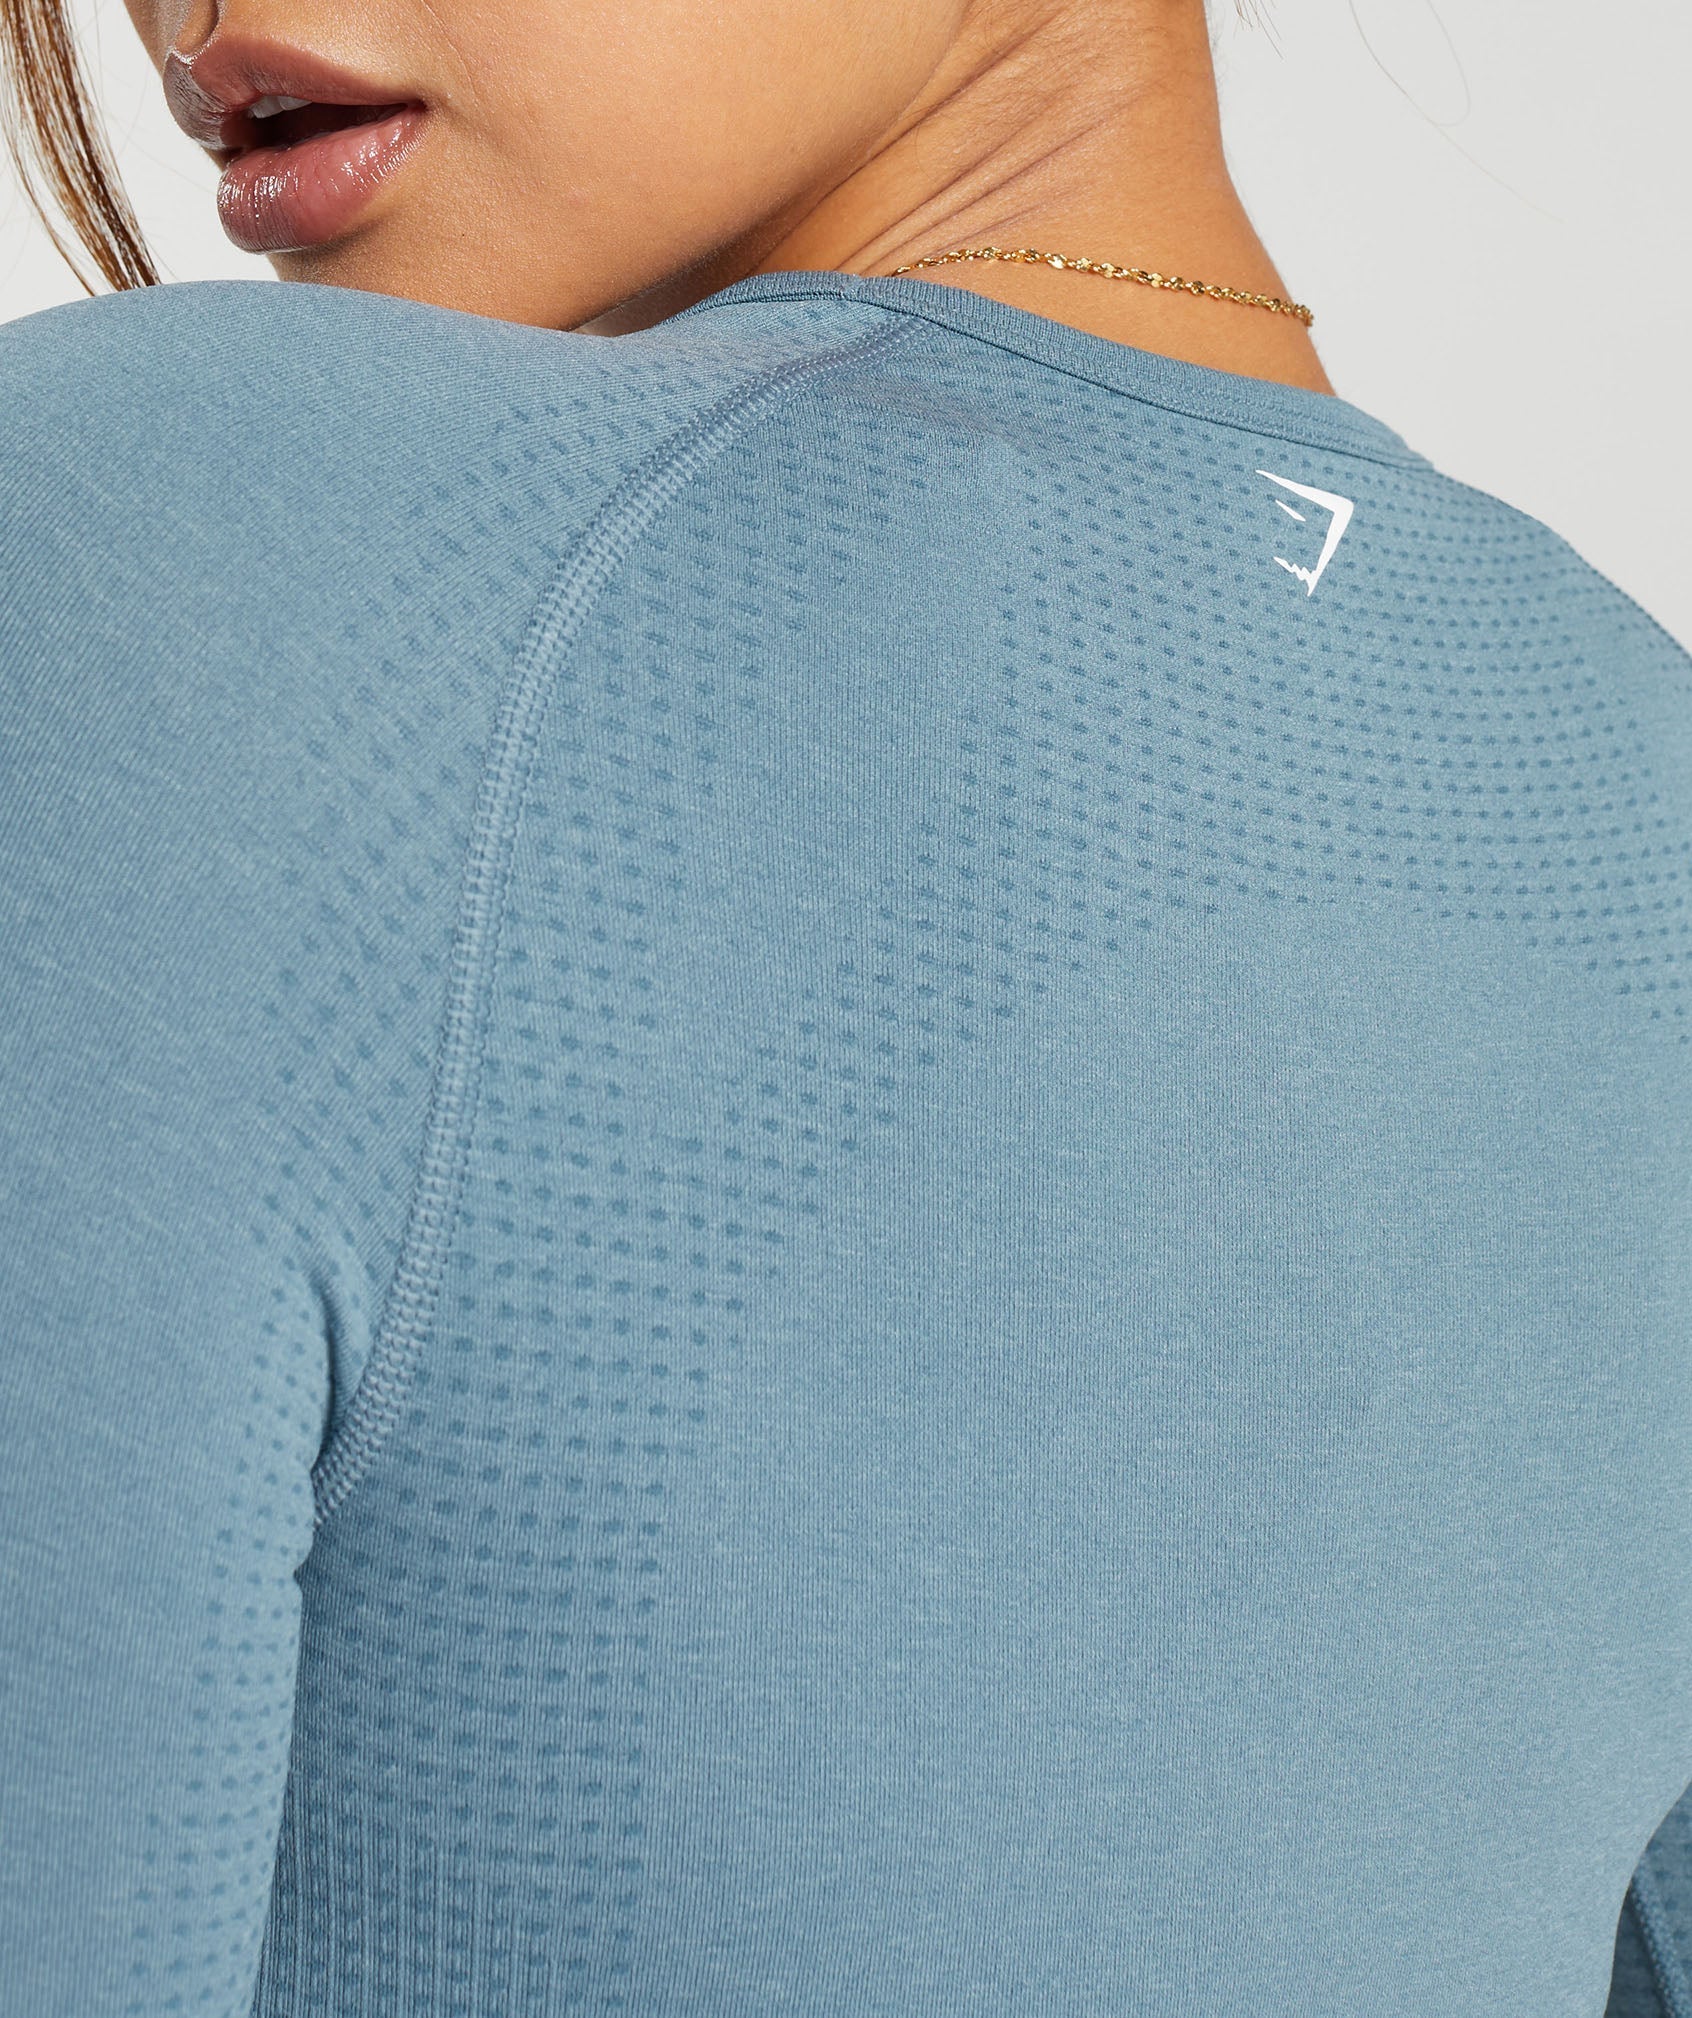 Vital Seamless 2.0 Crop Top in Faded Blue Marl - view 6